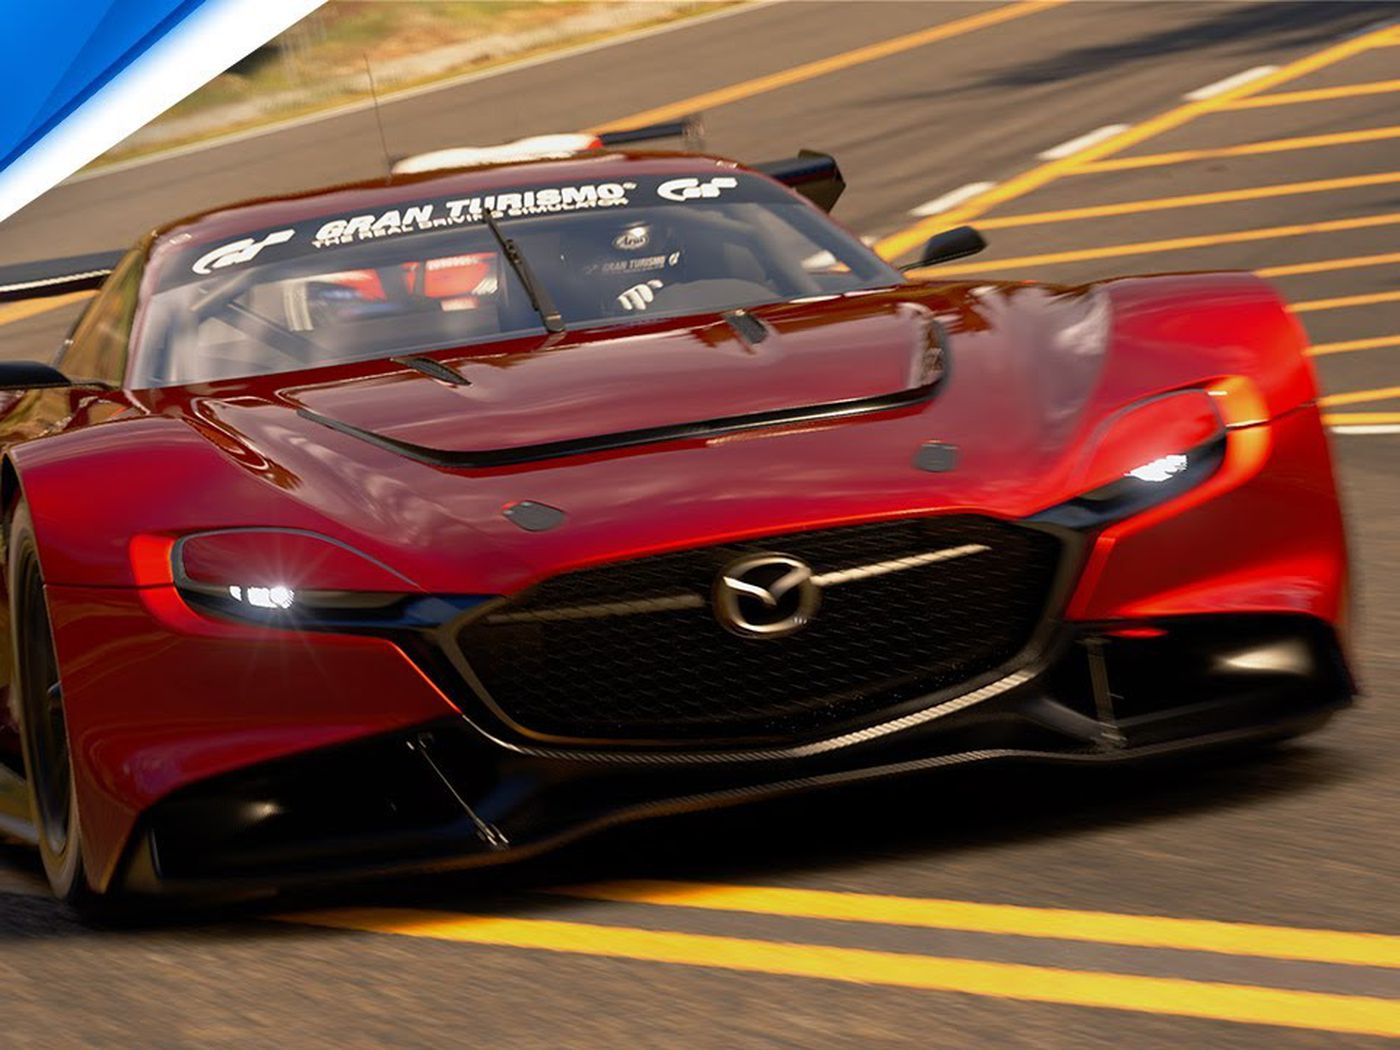 Gran Turismo 7 release date pushed back to 2022